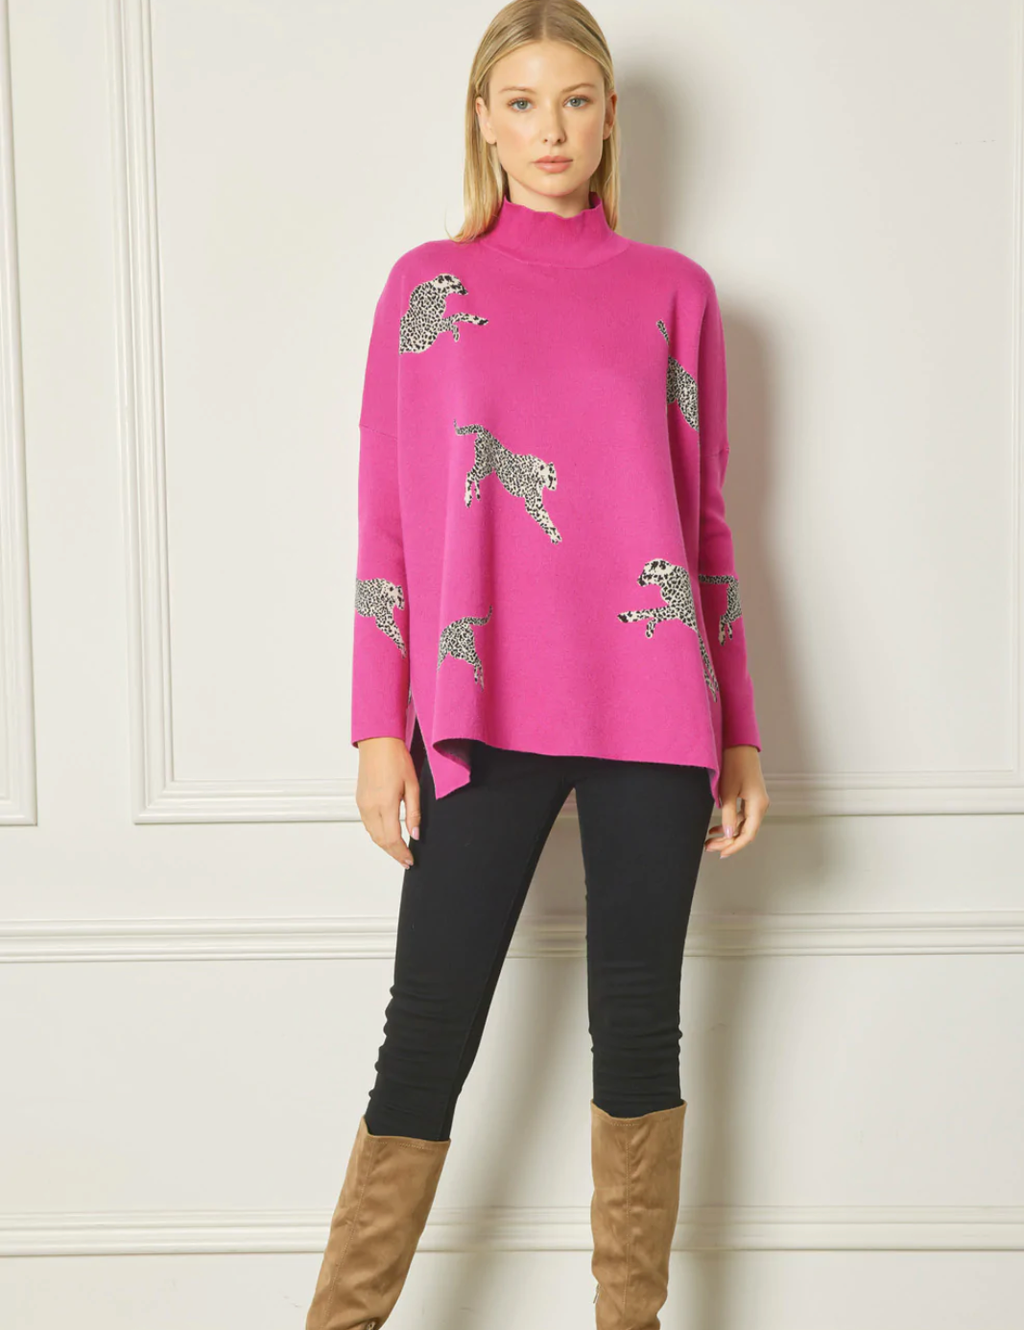 Hot Pink Oversized Leopard Sweater